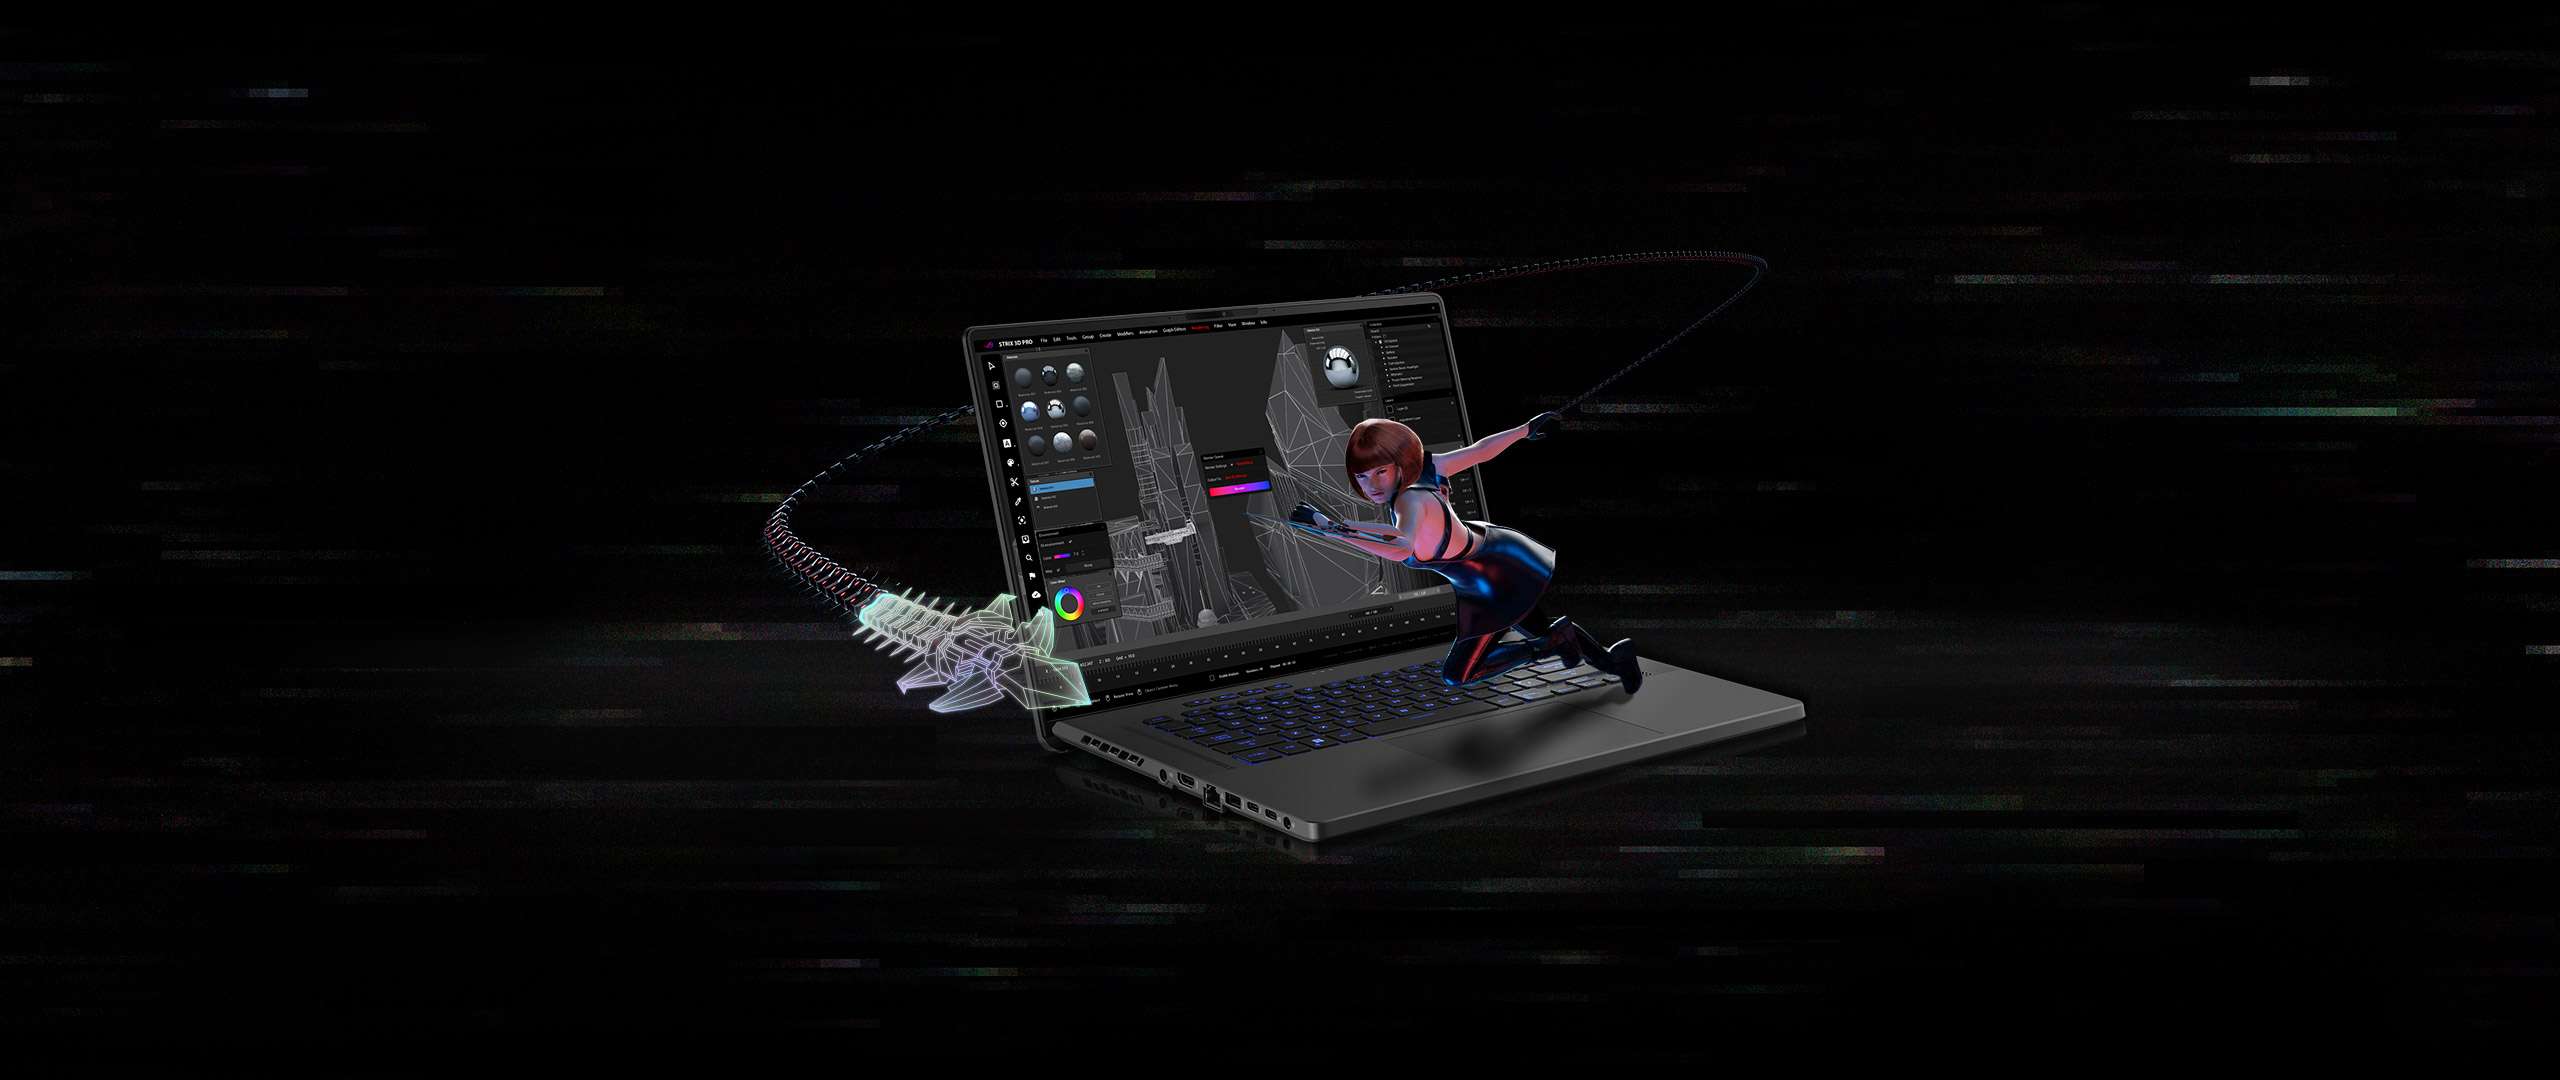 ROG SAGA character SE7EN rendered above the Zephyrus M16’s keyboard and using a digital whip, with game development software and a cityscape scene seen on screen. 